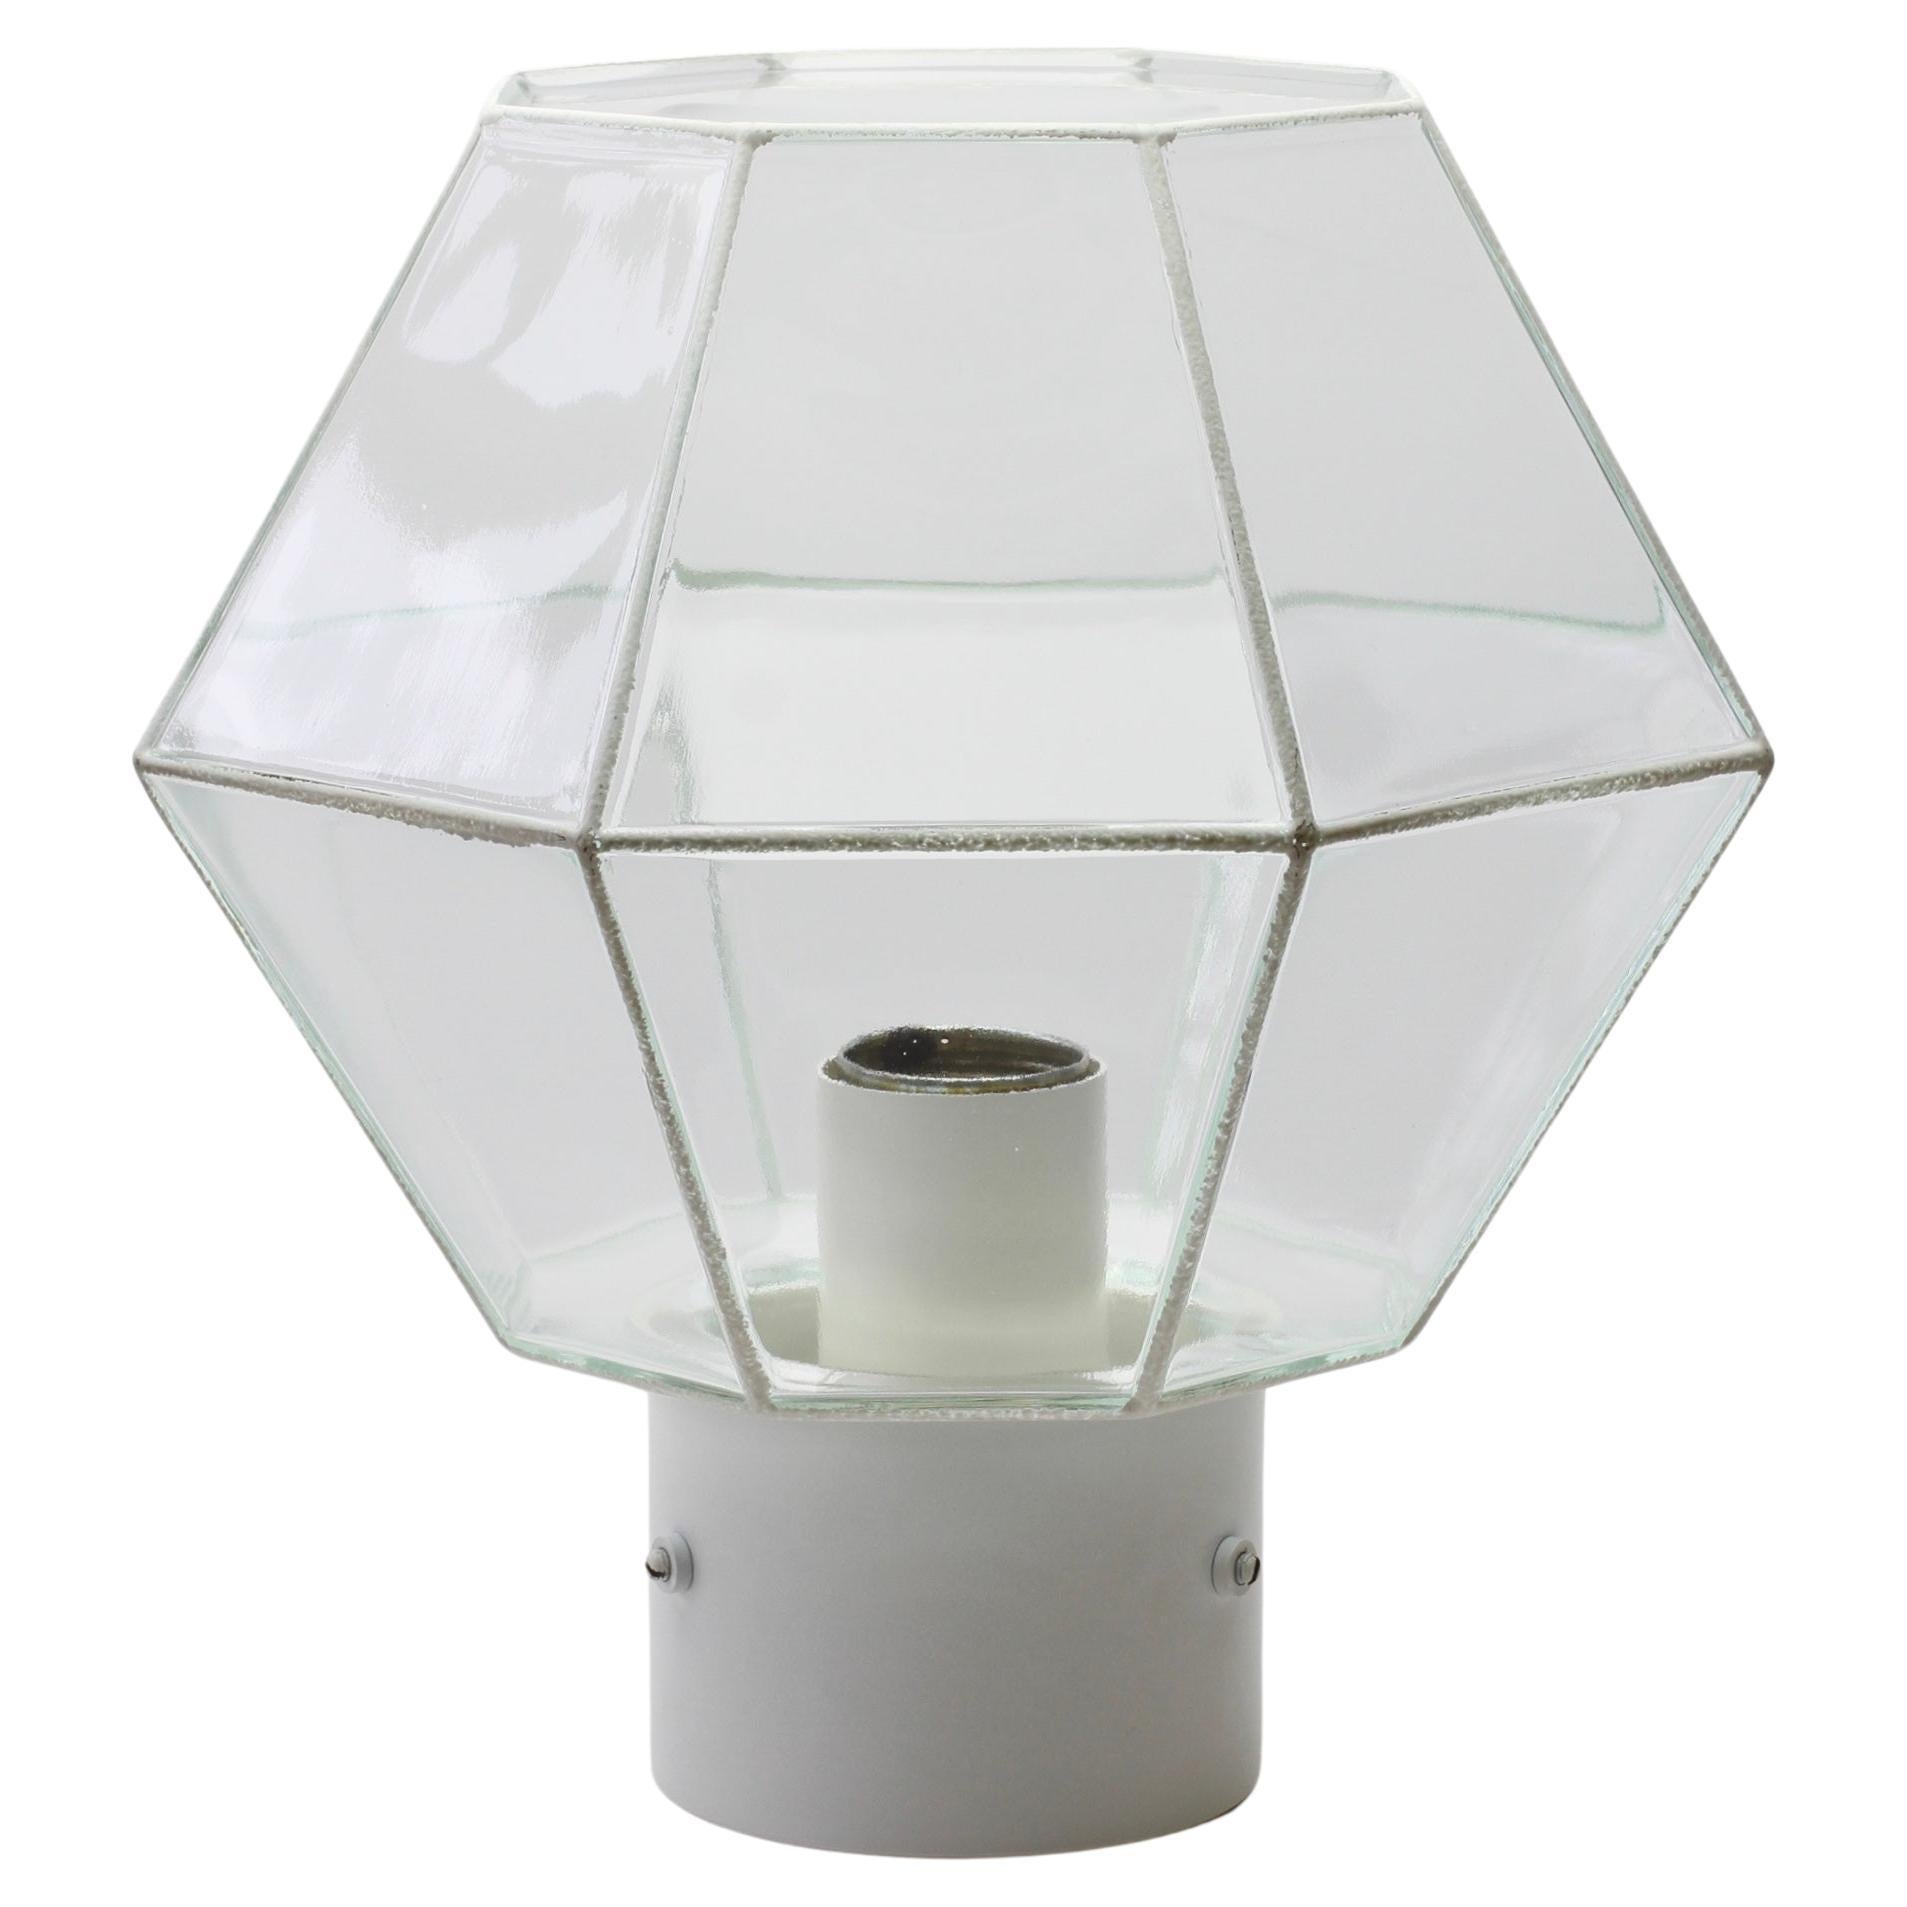 German Limburg 1 of a Pair Geometric White & Clear Glass 1970s Flush Mount Lights Lamps For Sale